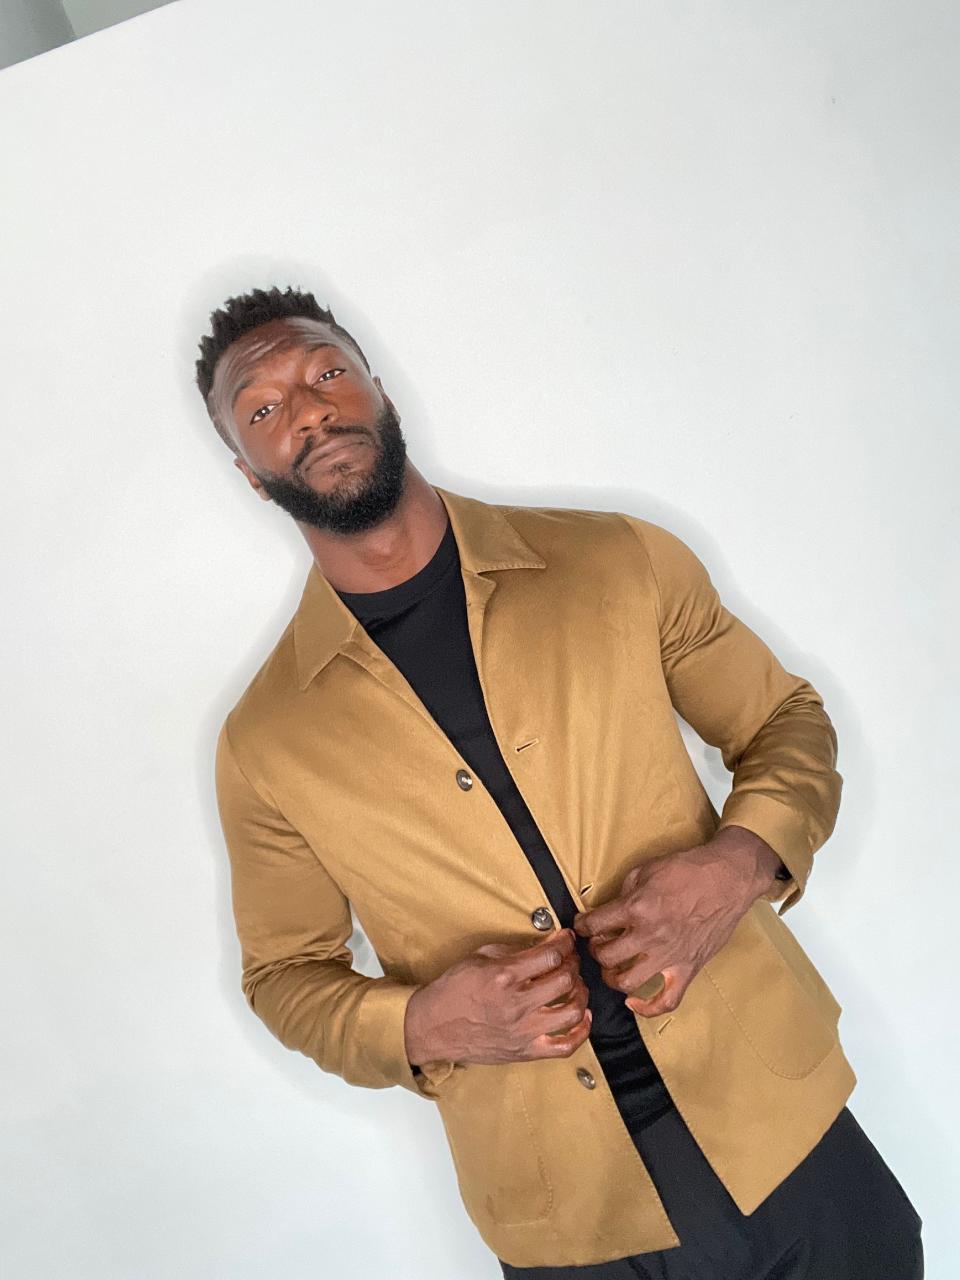 Aldis Hodge Turned the Zegna Men’s Show Into an At-Home Photo Shoot